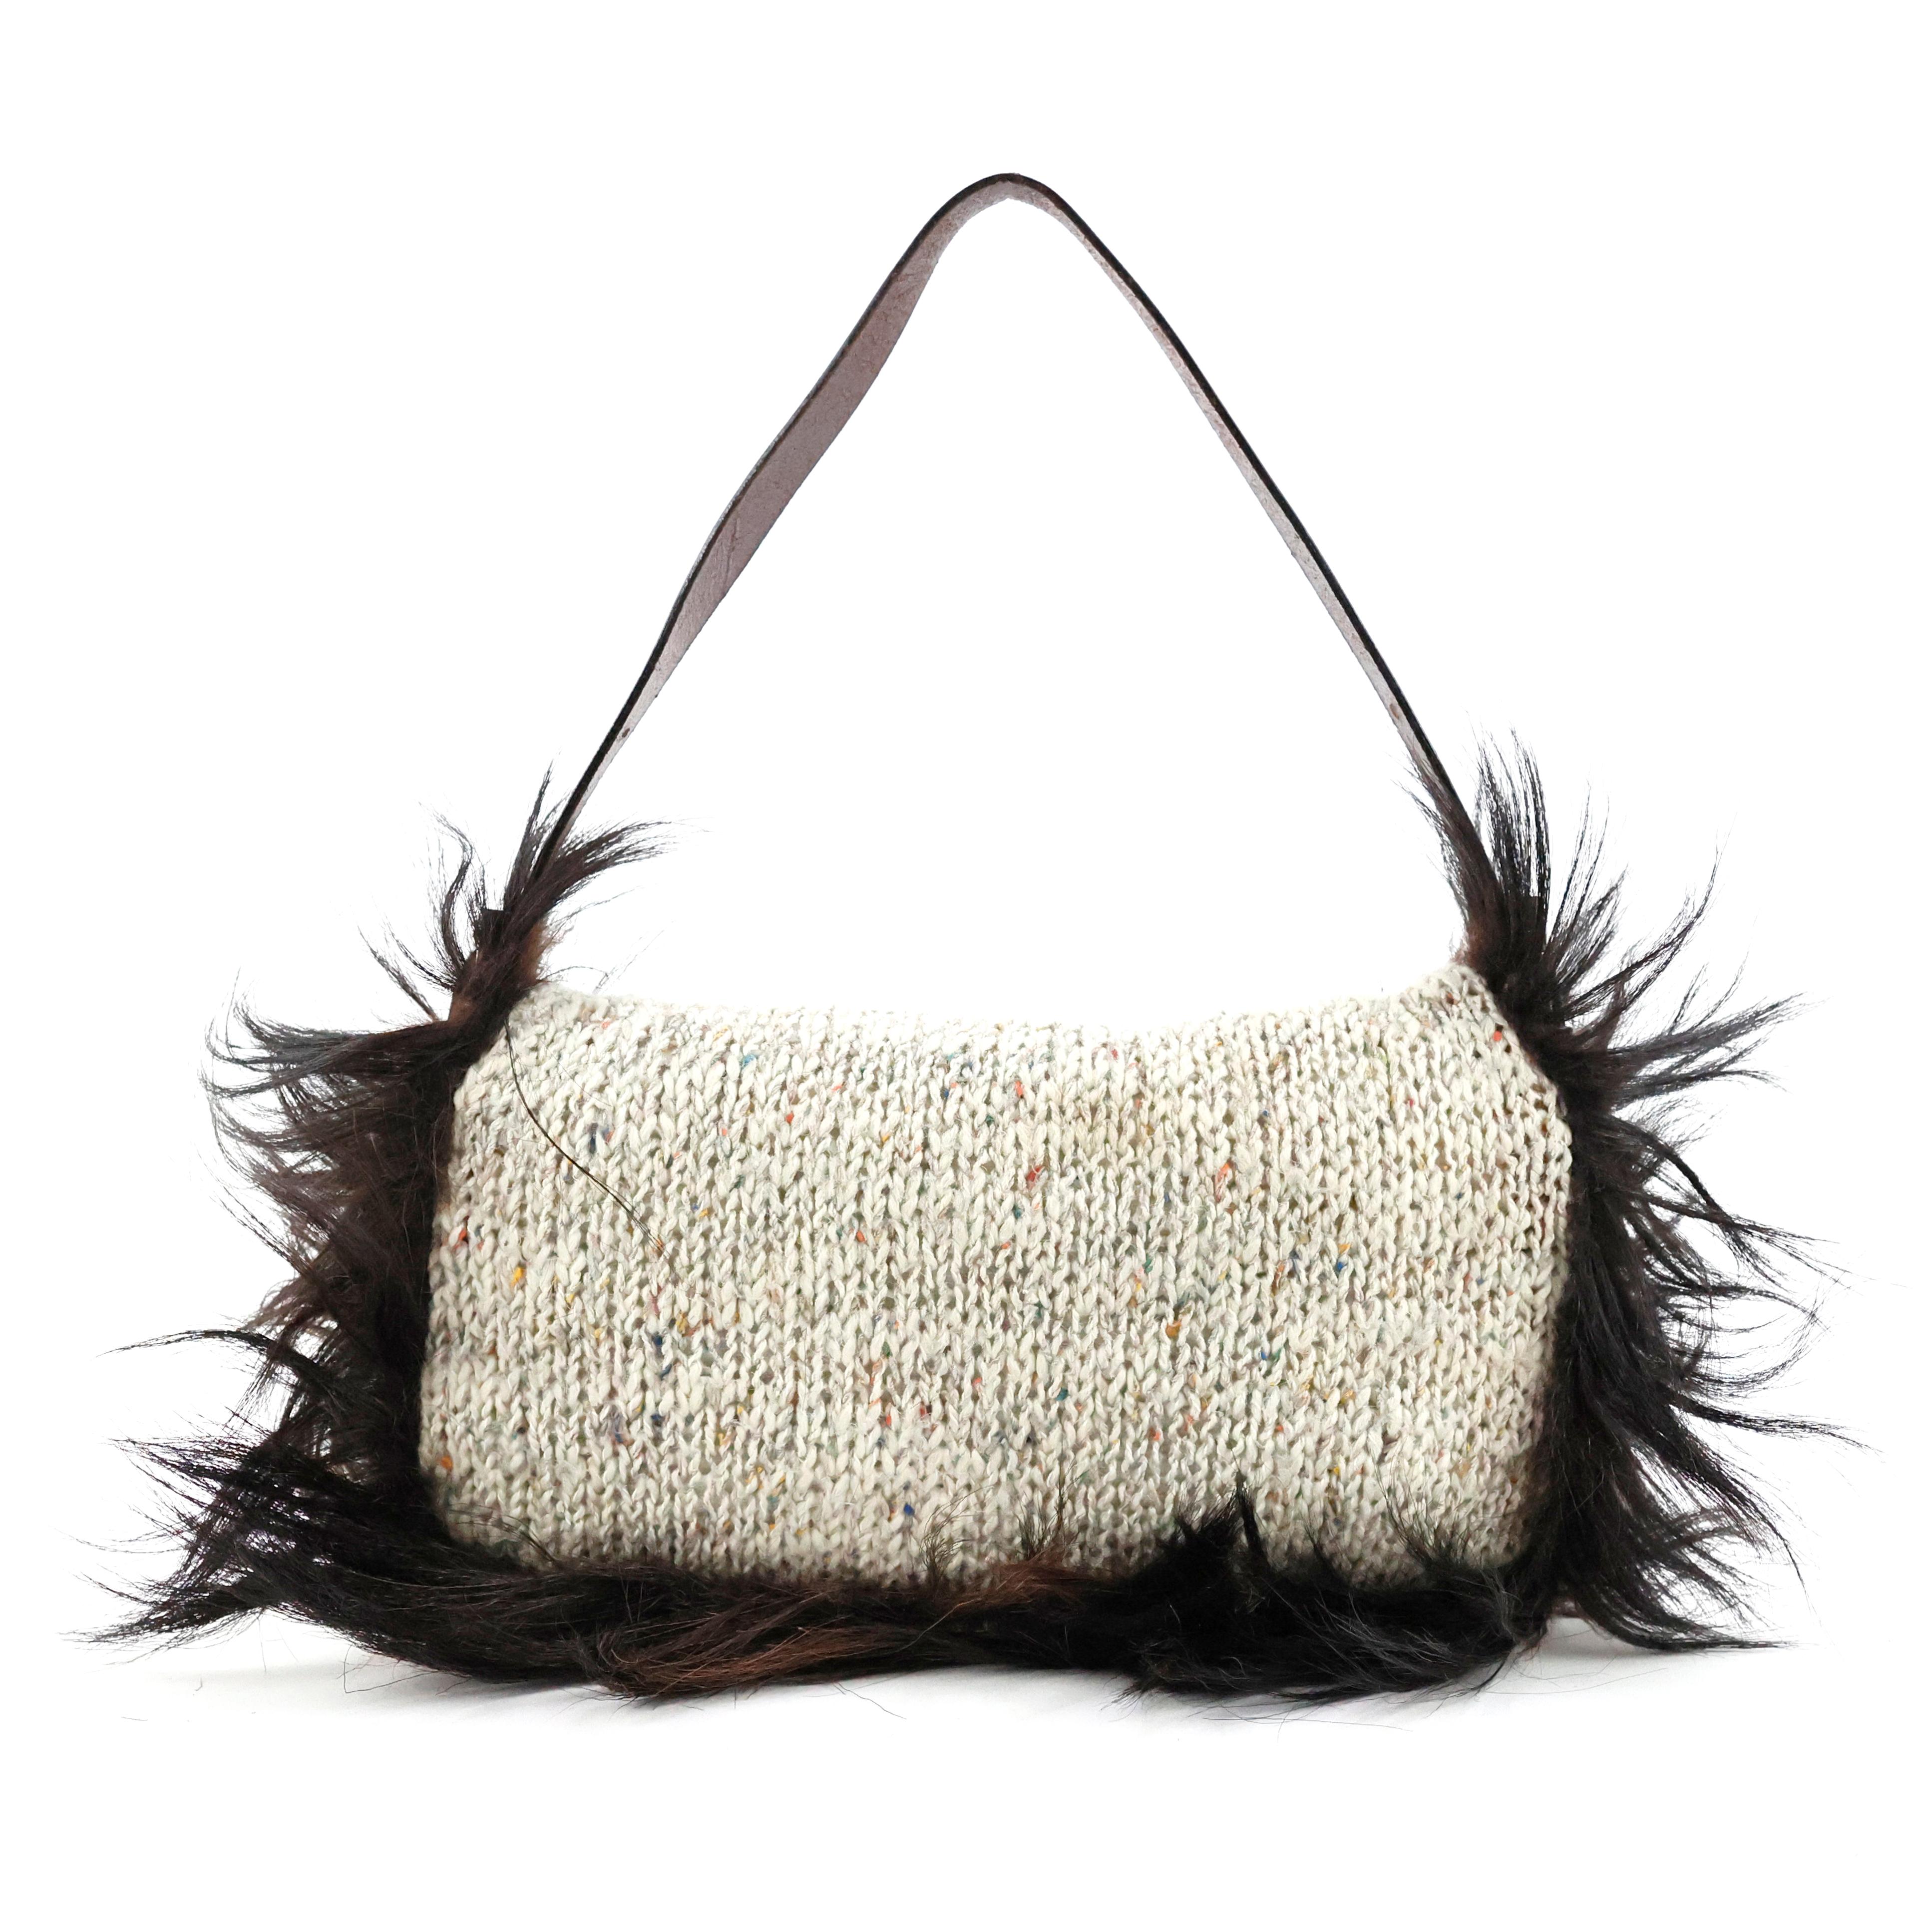 Rare Fendi beige wool knitted baguette with brown fur.

Condition:
Really good.

Measurements:
25cm x 14cm x 4cm